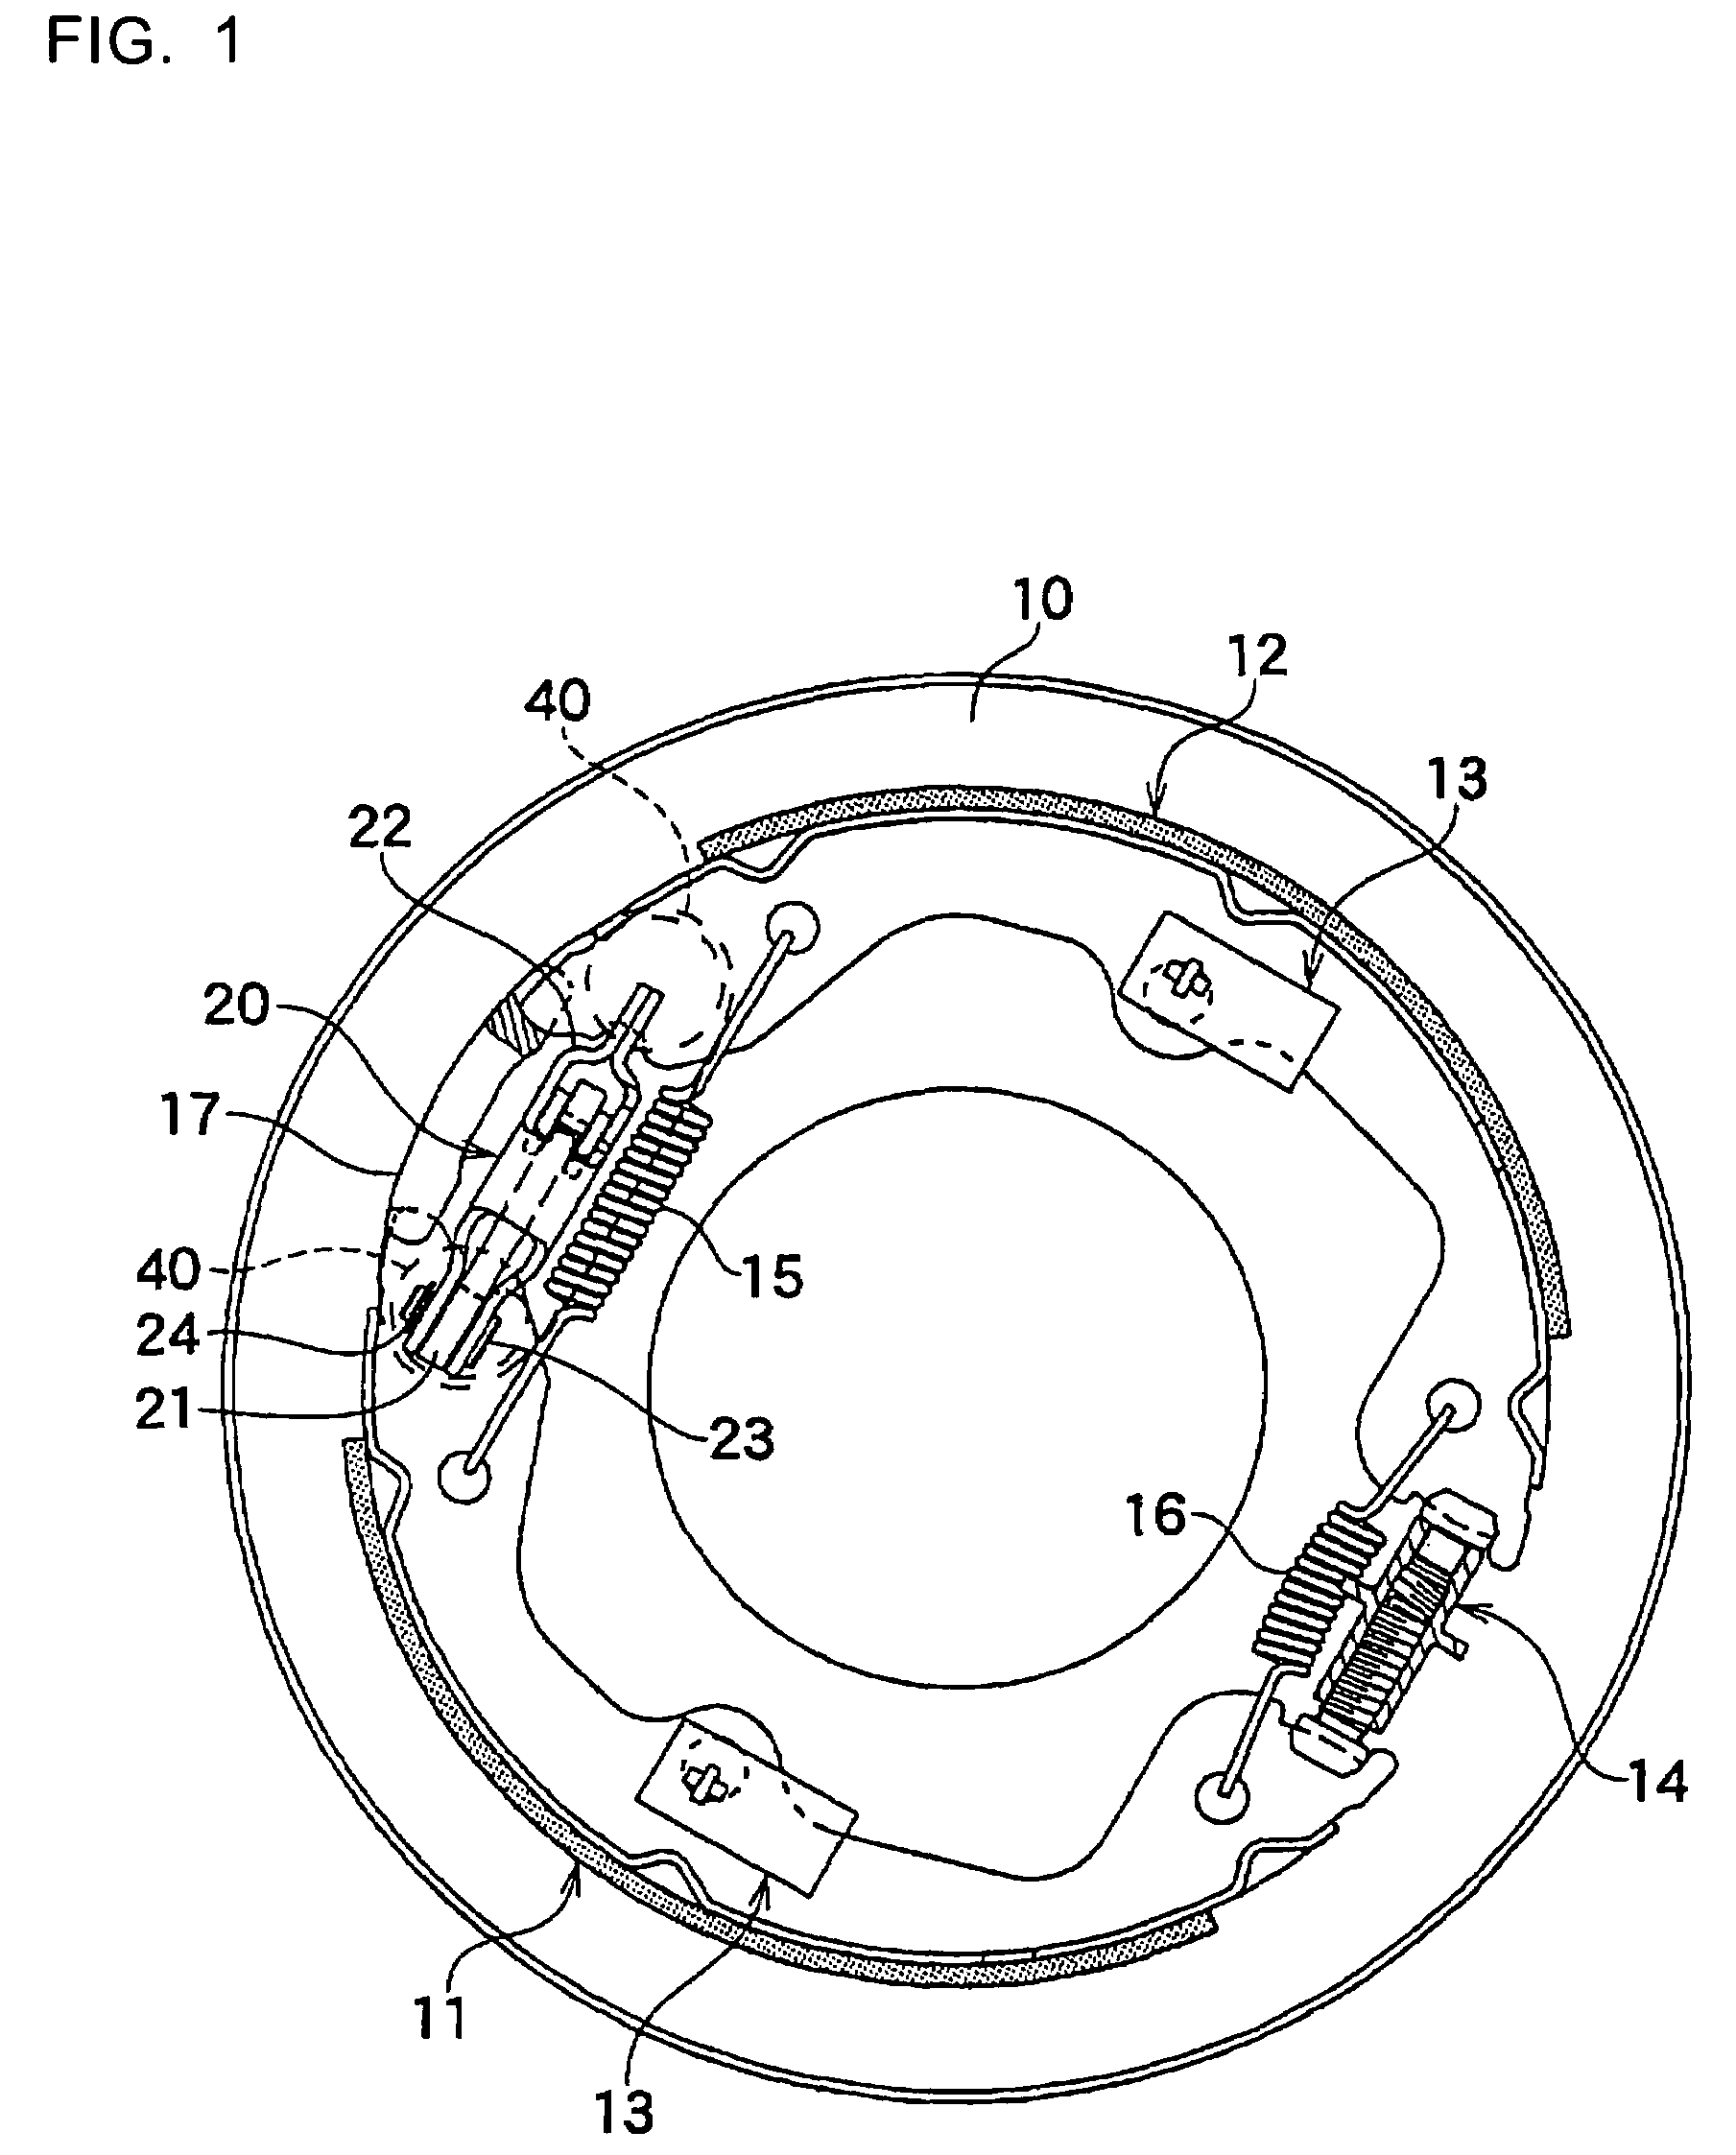 Brake cable connecting apparatus